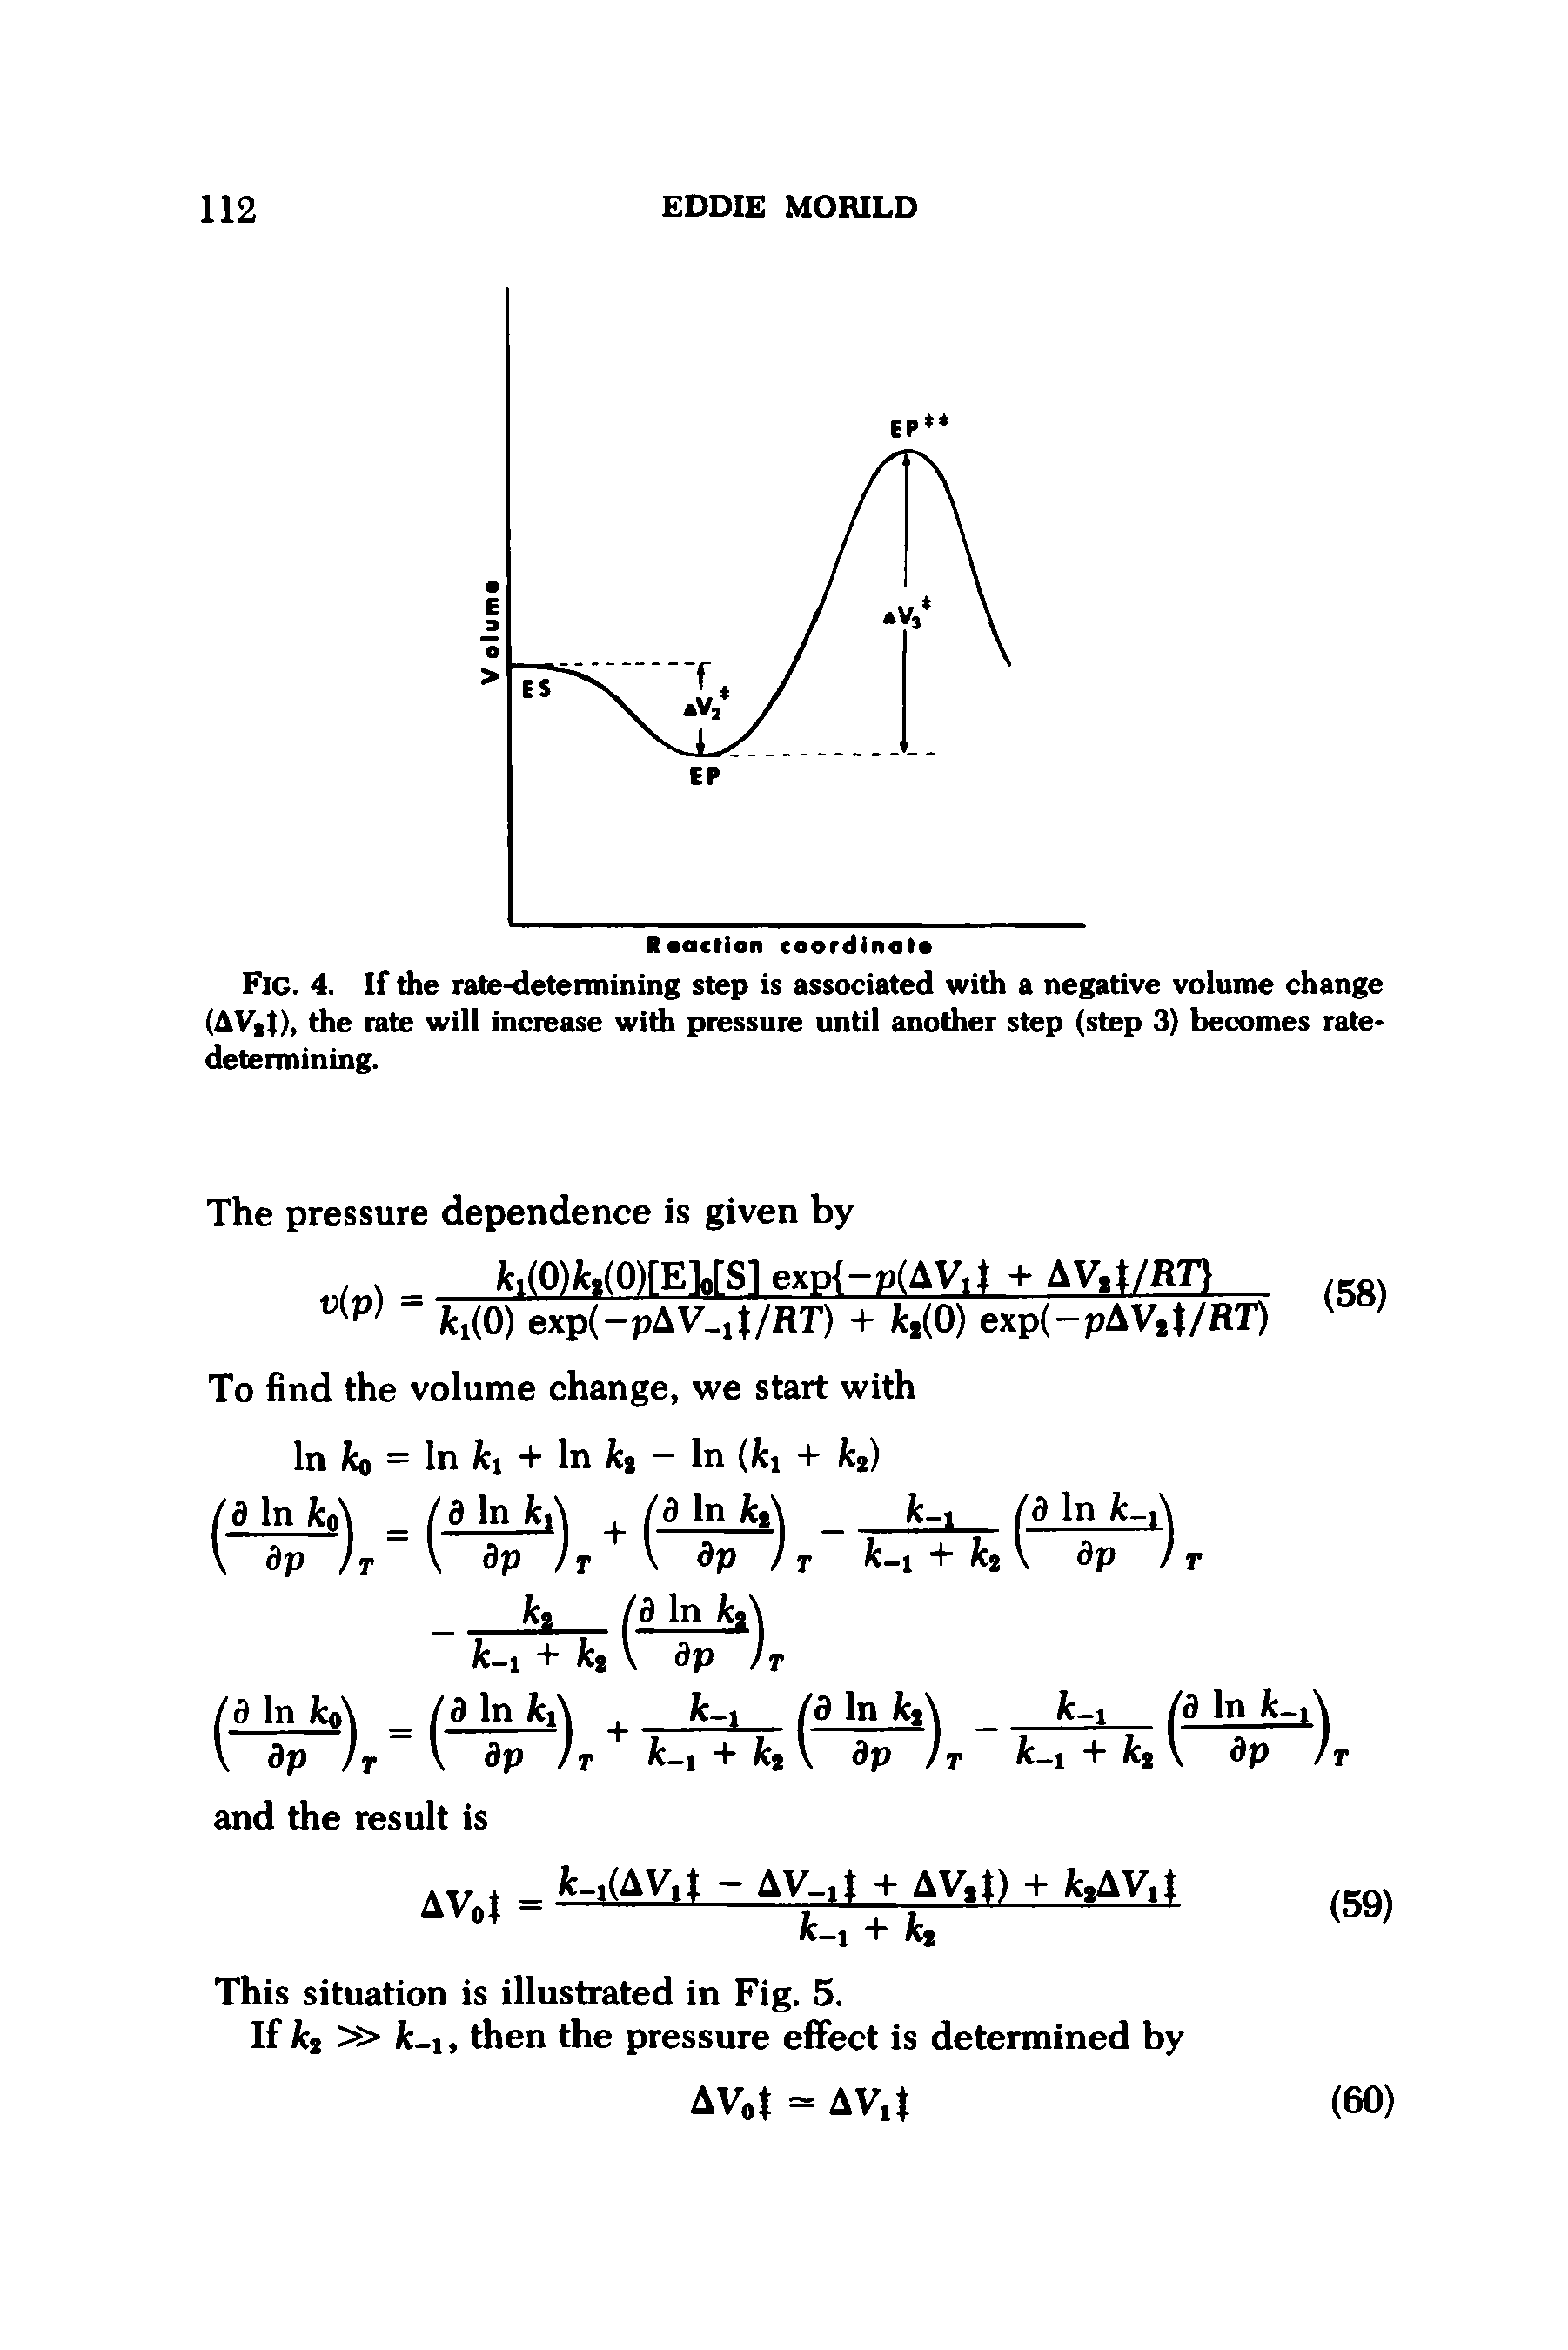 Fig. 4. If the rate-determining step is associated with a negative volume change (AV,t), the rate will increase with pressure until another step (step 3) becomes ratedetermining.